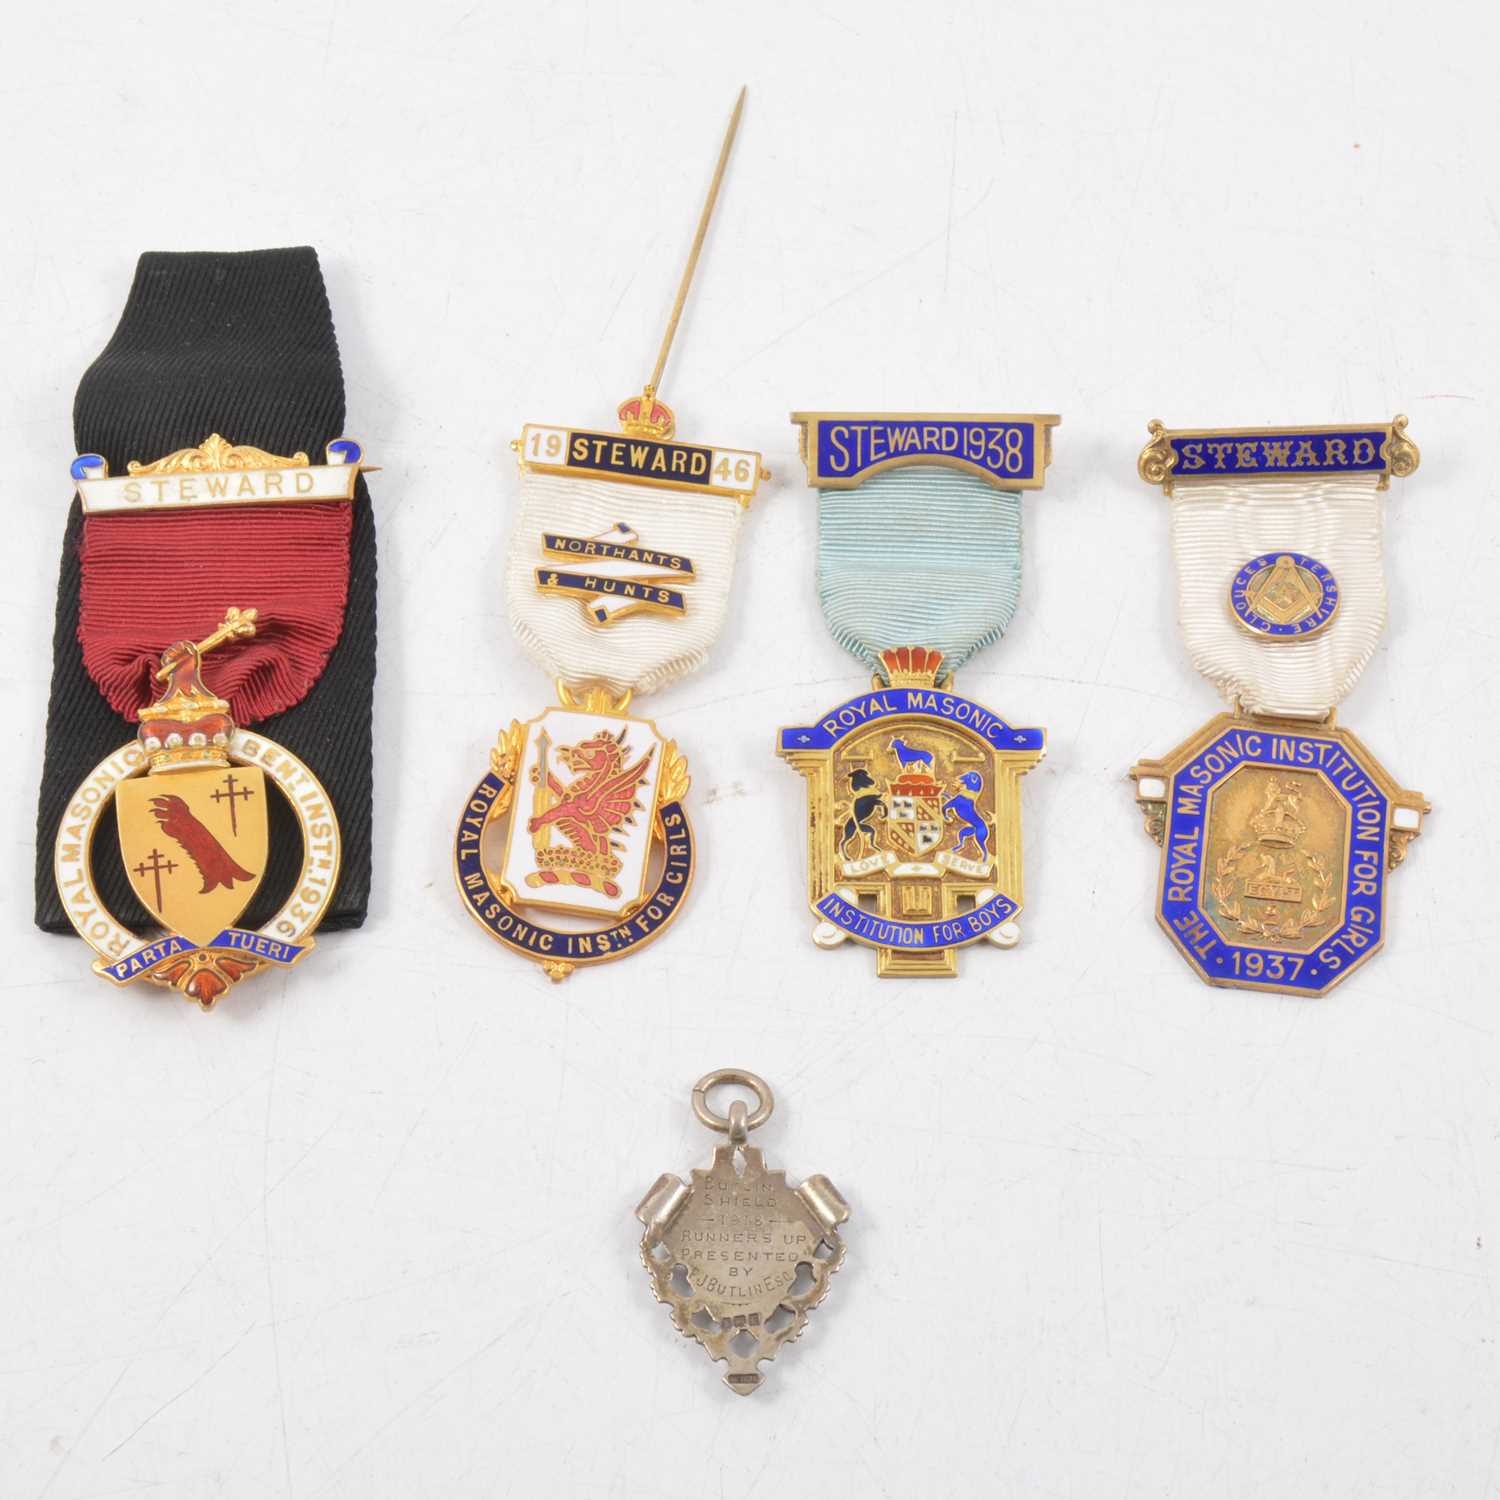 Lot 29 - Three silver gilt and enamel Royal Masonic Steward medals, a gilded metal medal and a silver runners up shield.